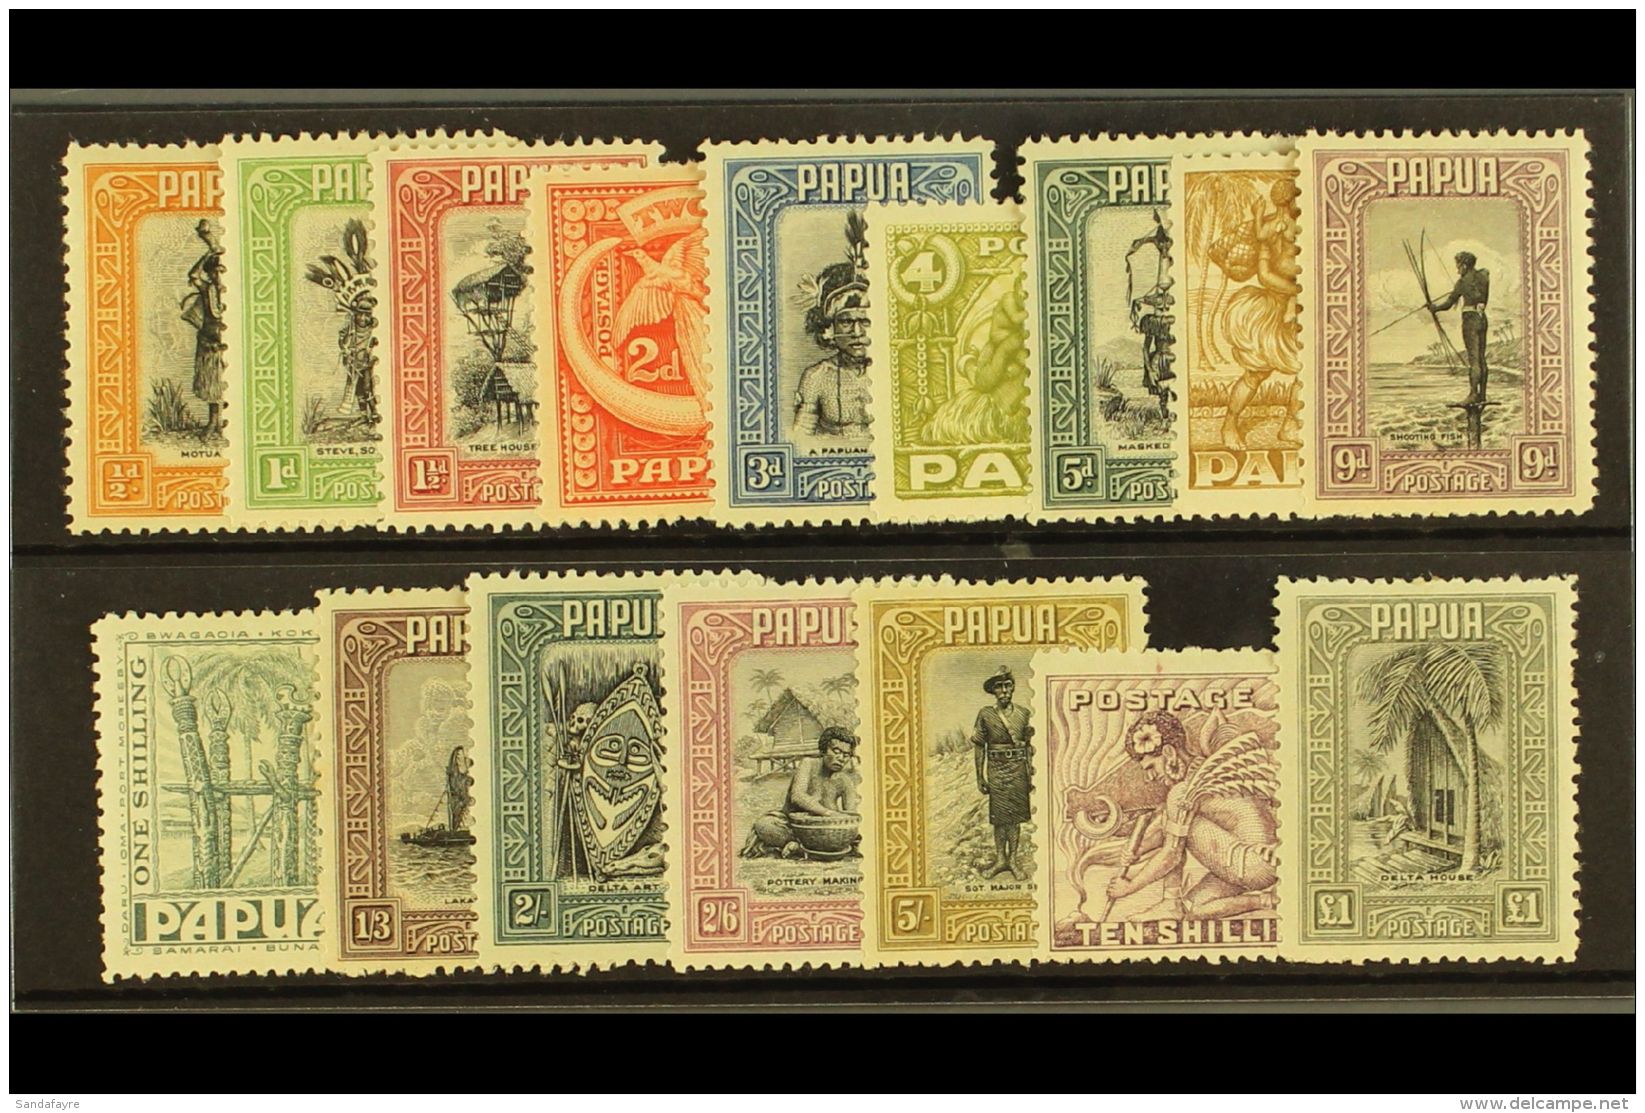 1932 Native Scenes Set Complete, SG 130/45, 6d And 2s Tiny Hinge Thins Otherwise Very Fine And Fresh Mint. (16... - Papua-Neuguinea